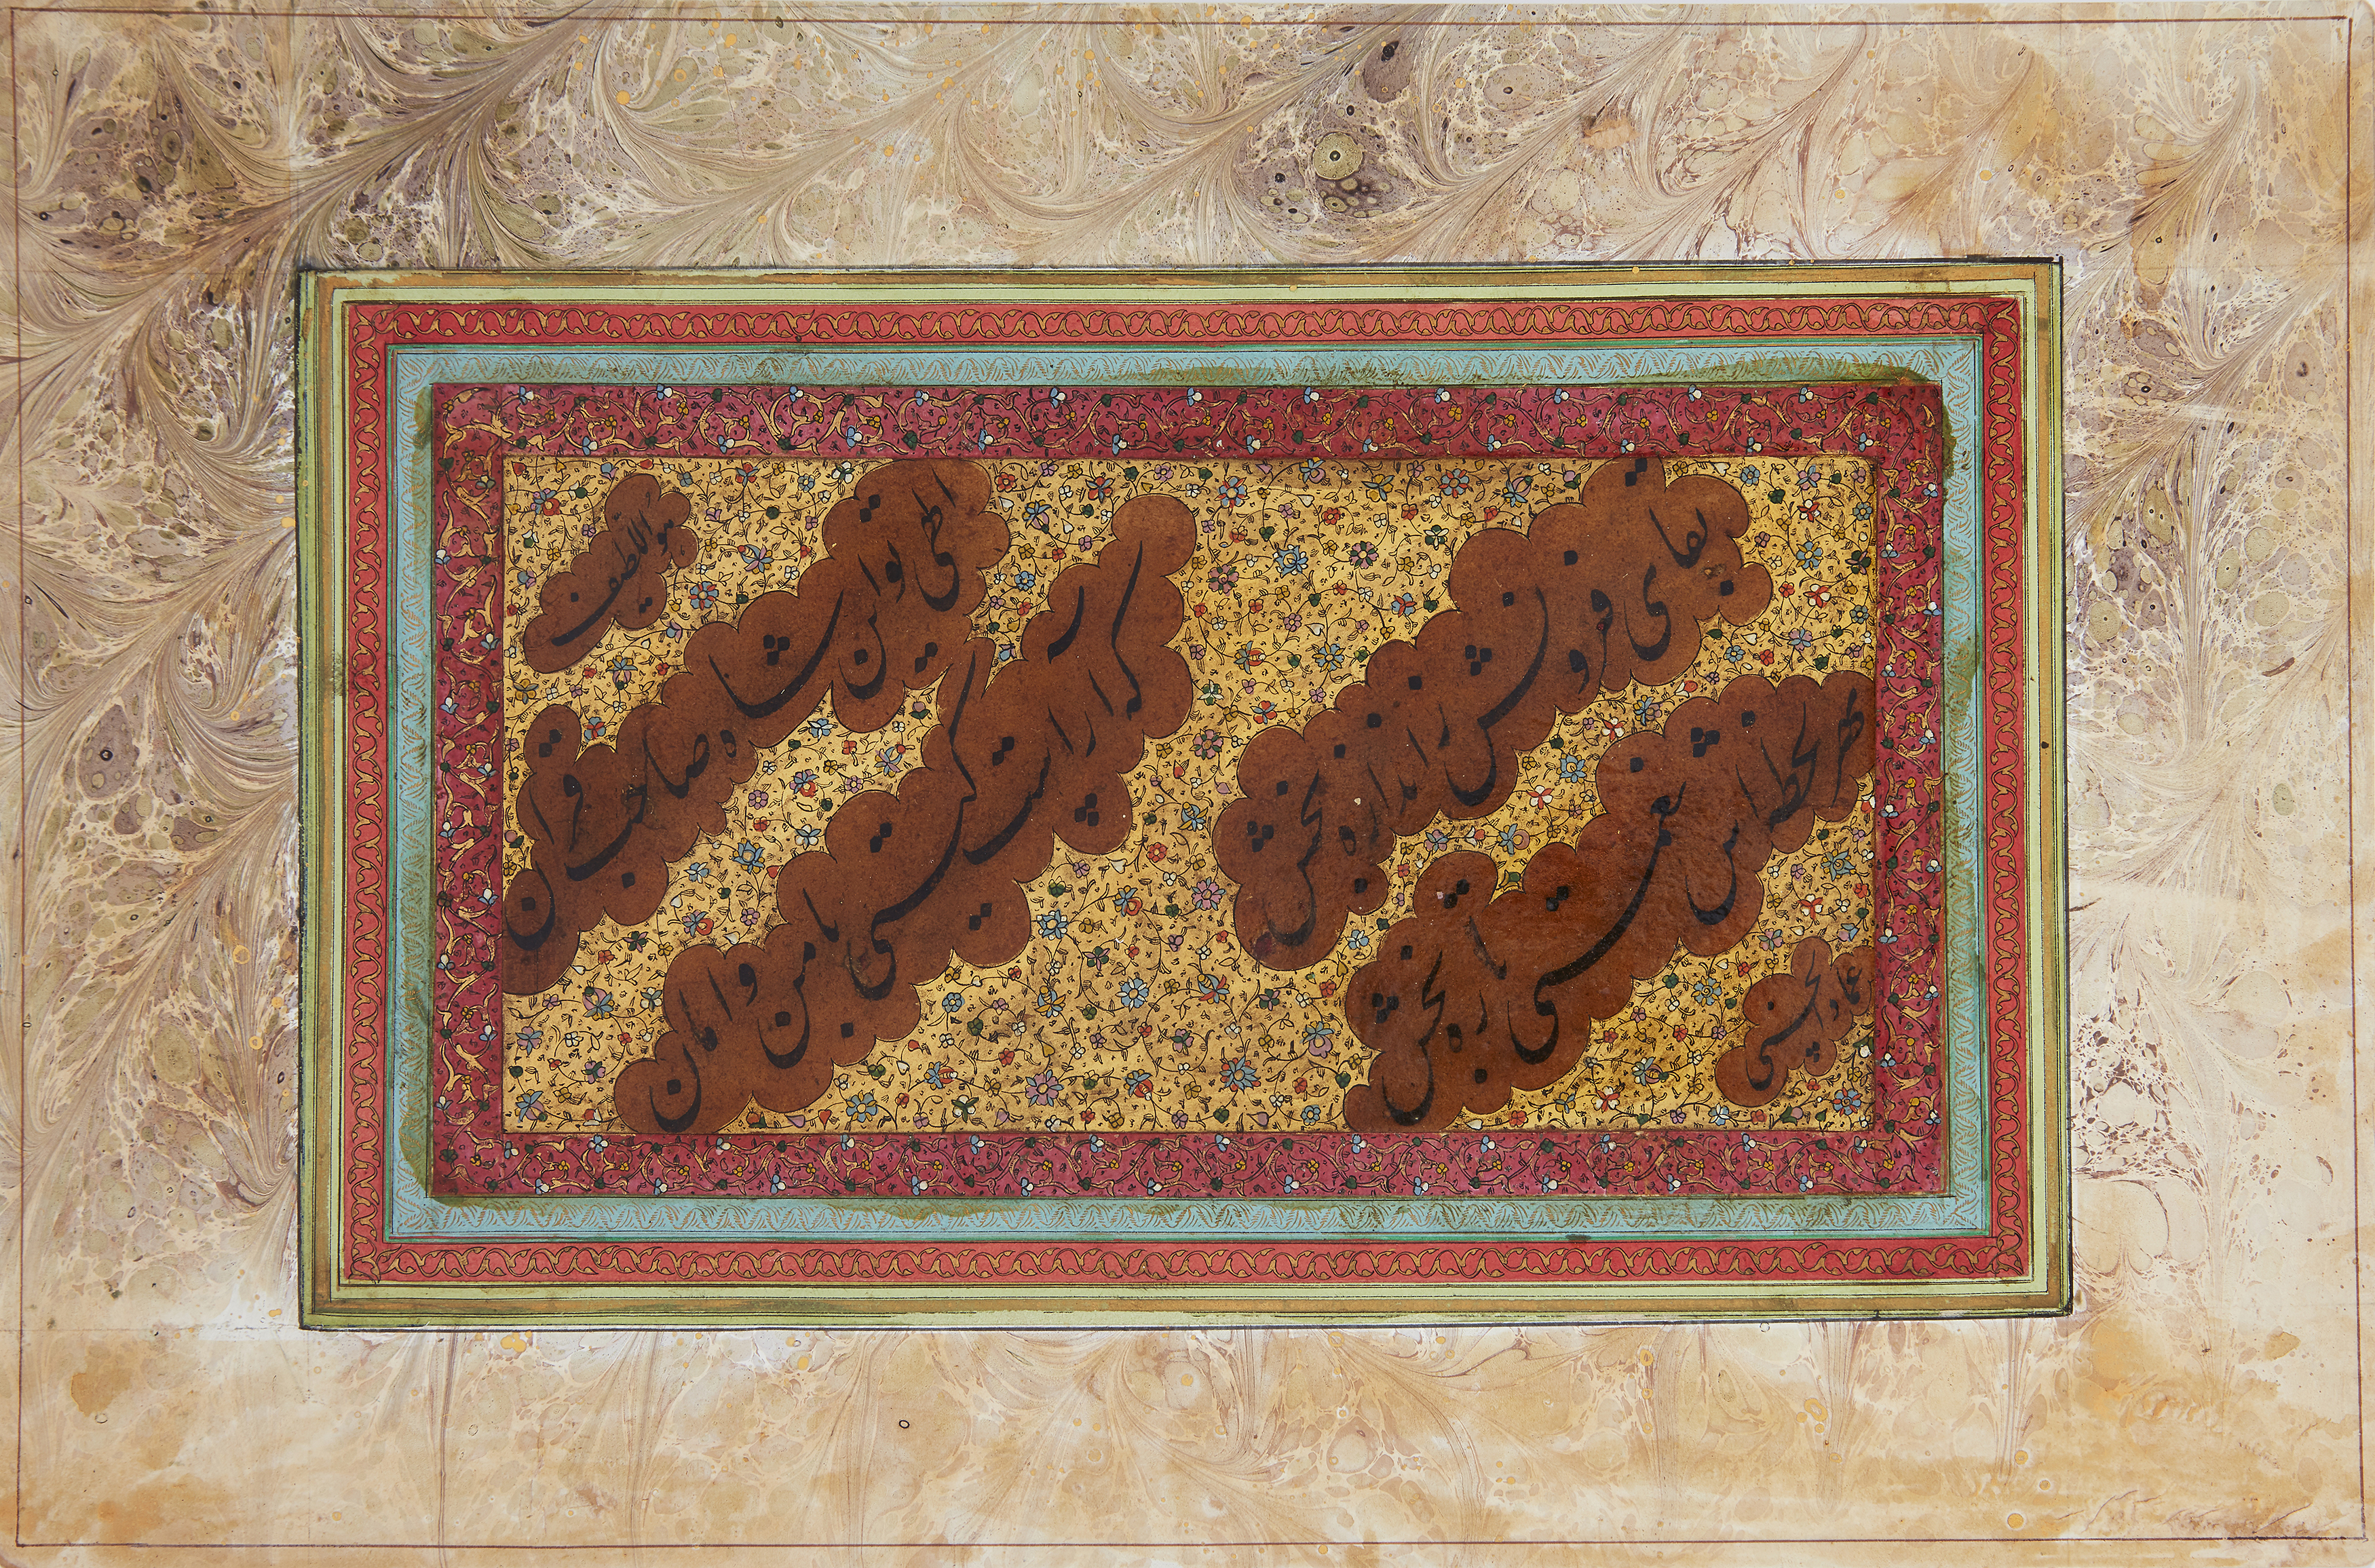 Property from An Important Private Collection Six calligraphic panels, Qajar Iran, 19th century... - Image 6 of 6